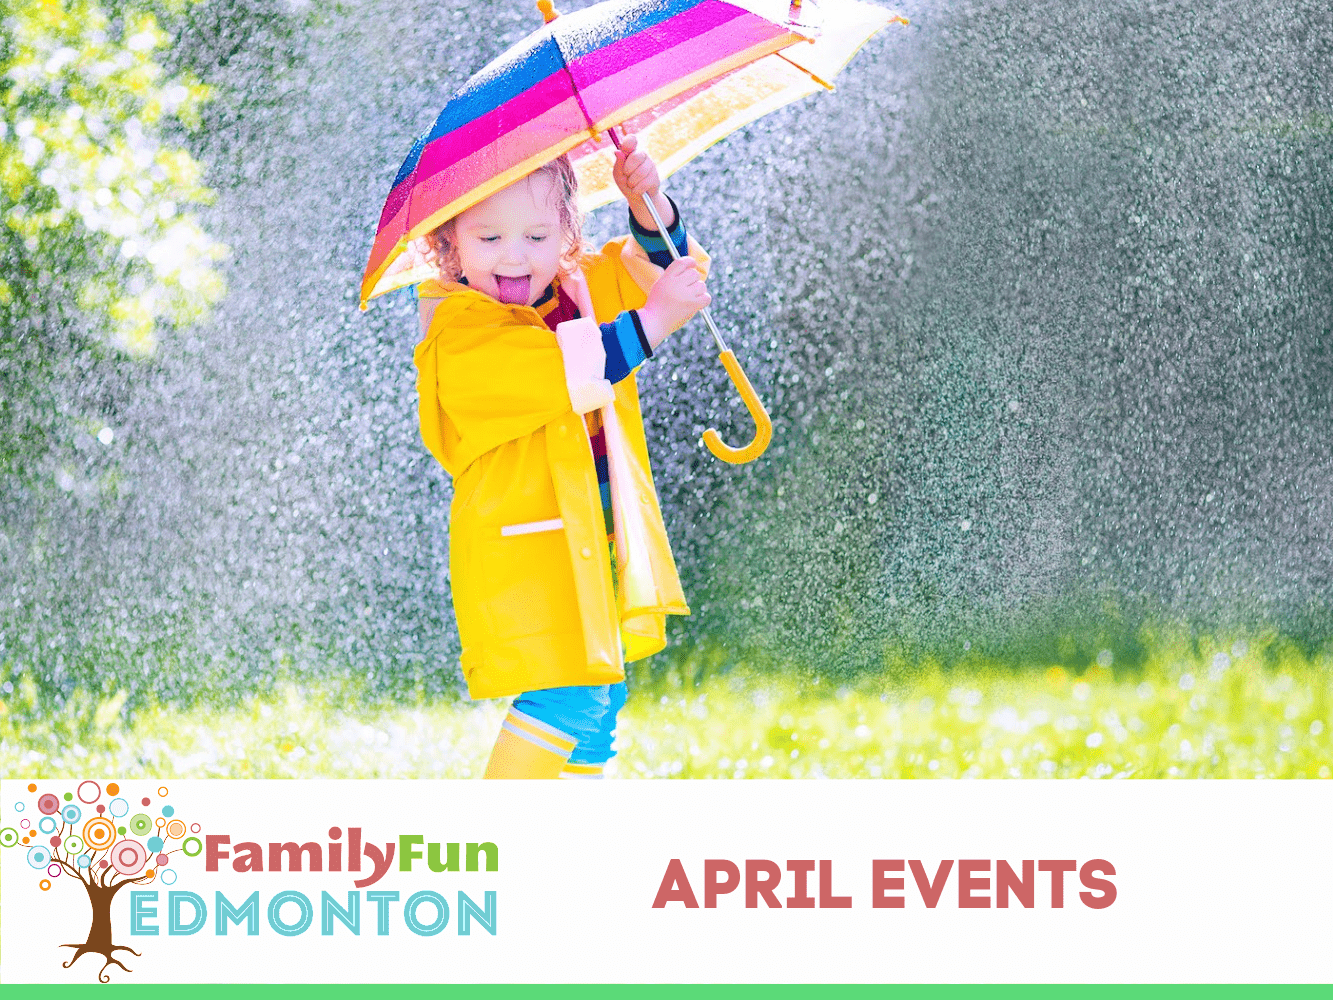 What's Happening in April? April Events (Family Fun Edmonton)